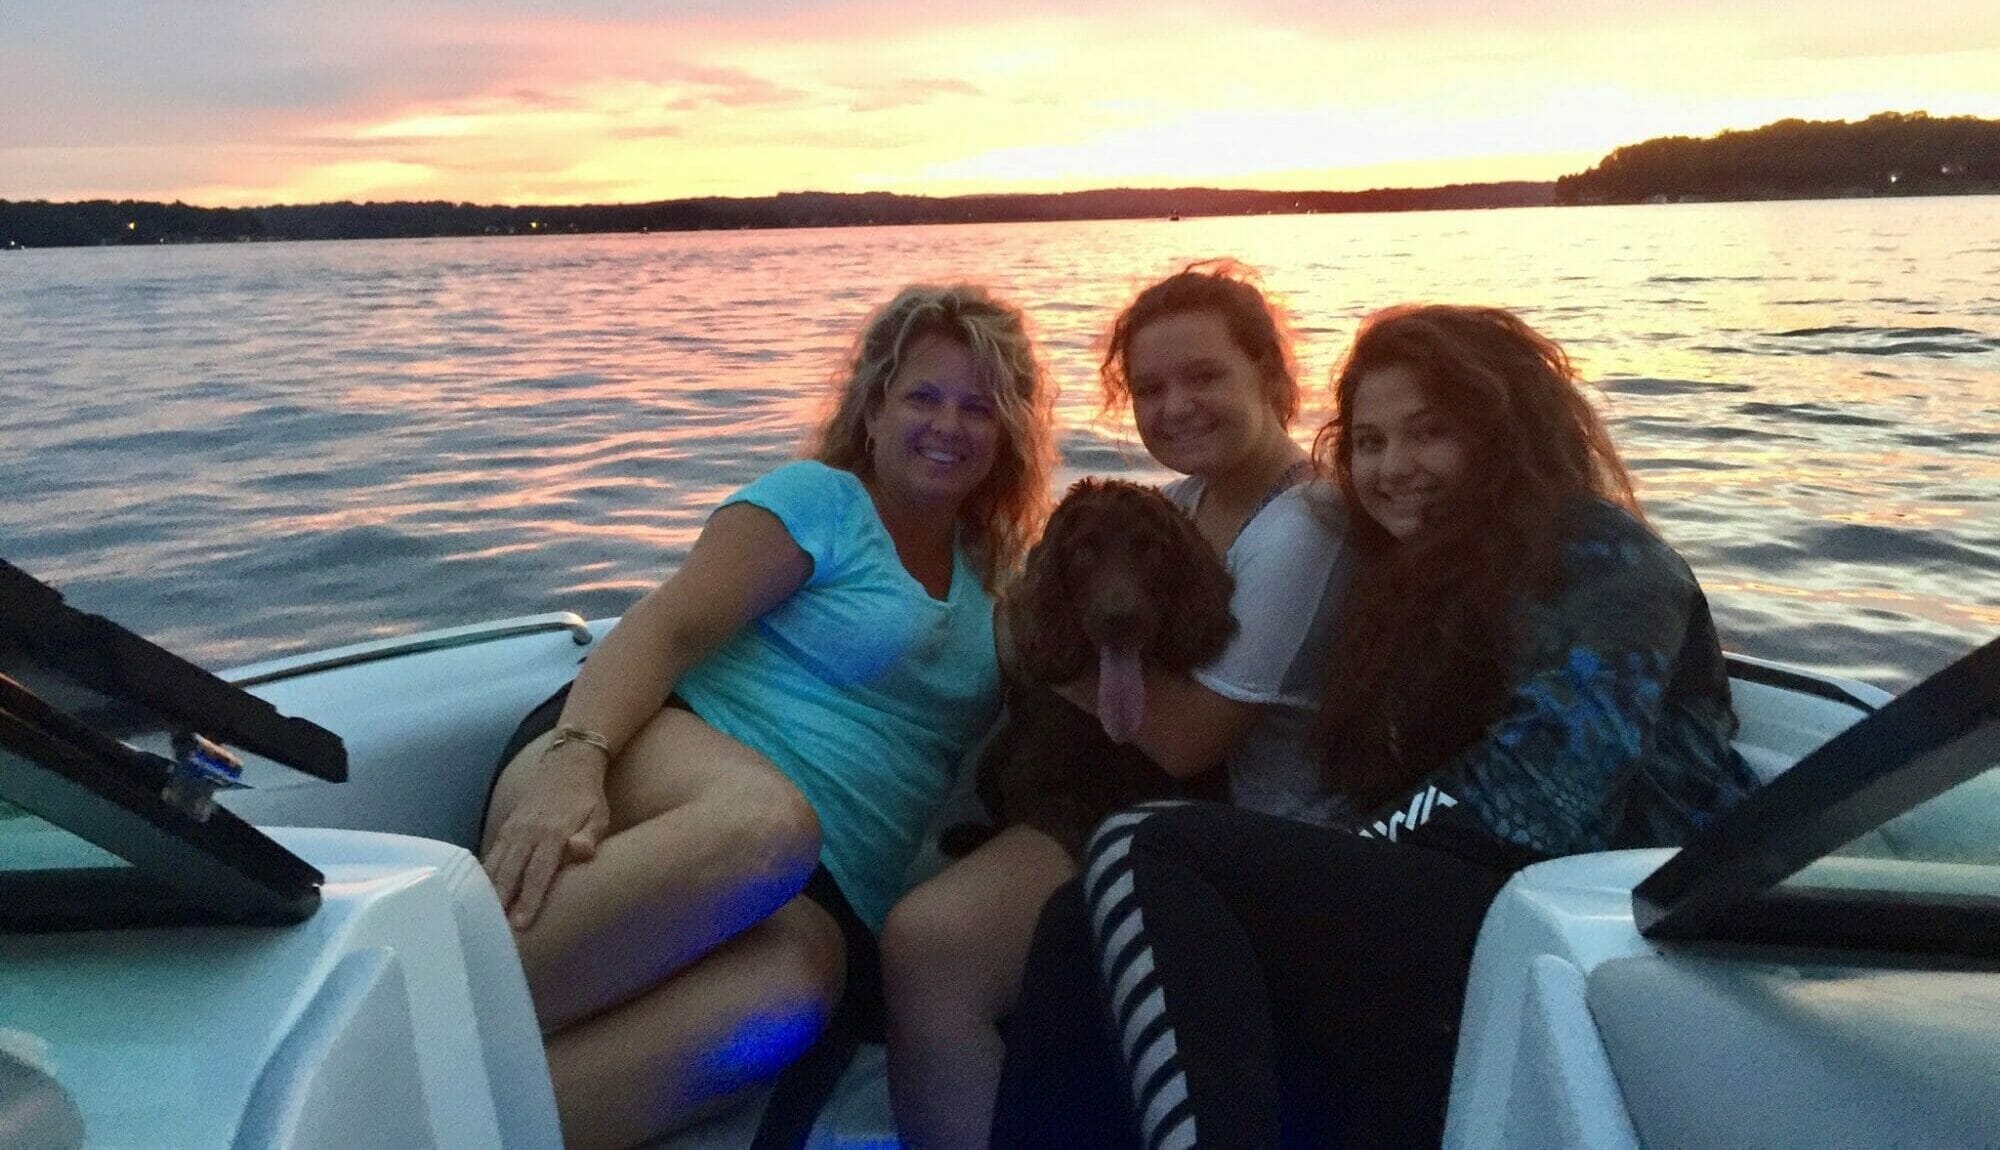 Three women and a dog on a wakesurf boat at sunset.